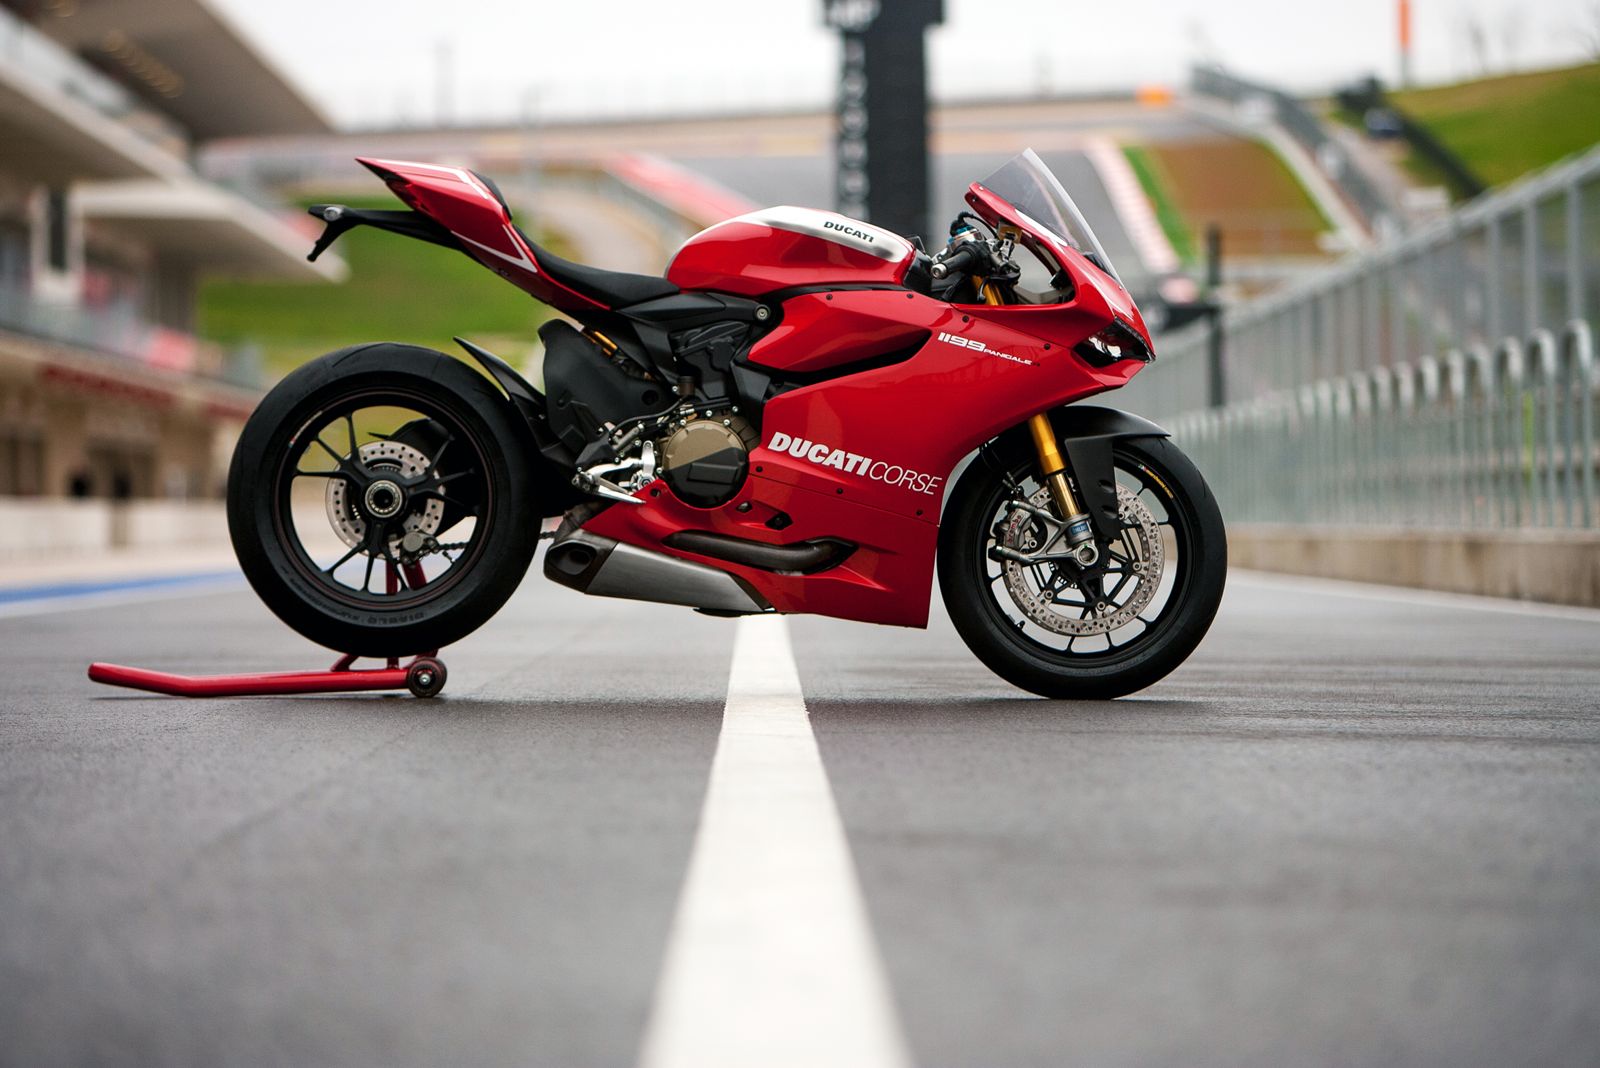 2013 Ducati 1199 Panigale R Official Pictures   autoevolution